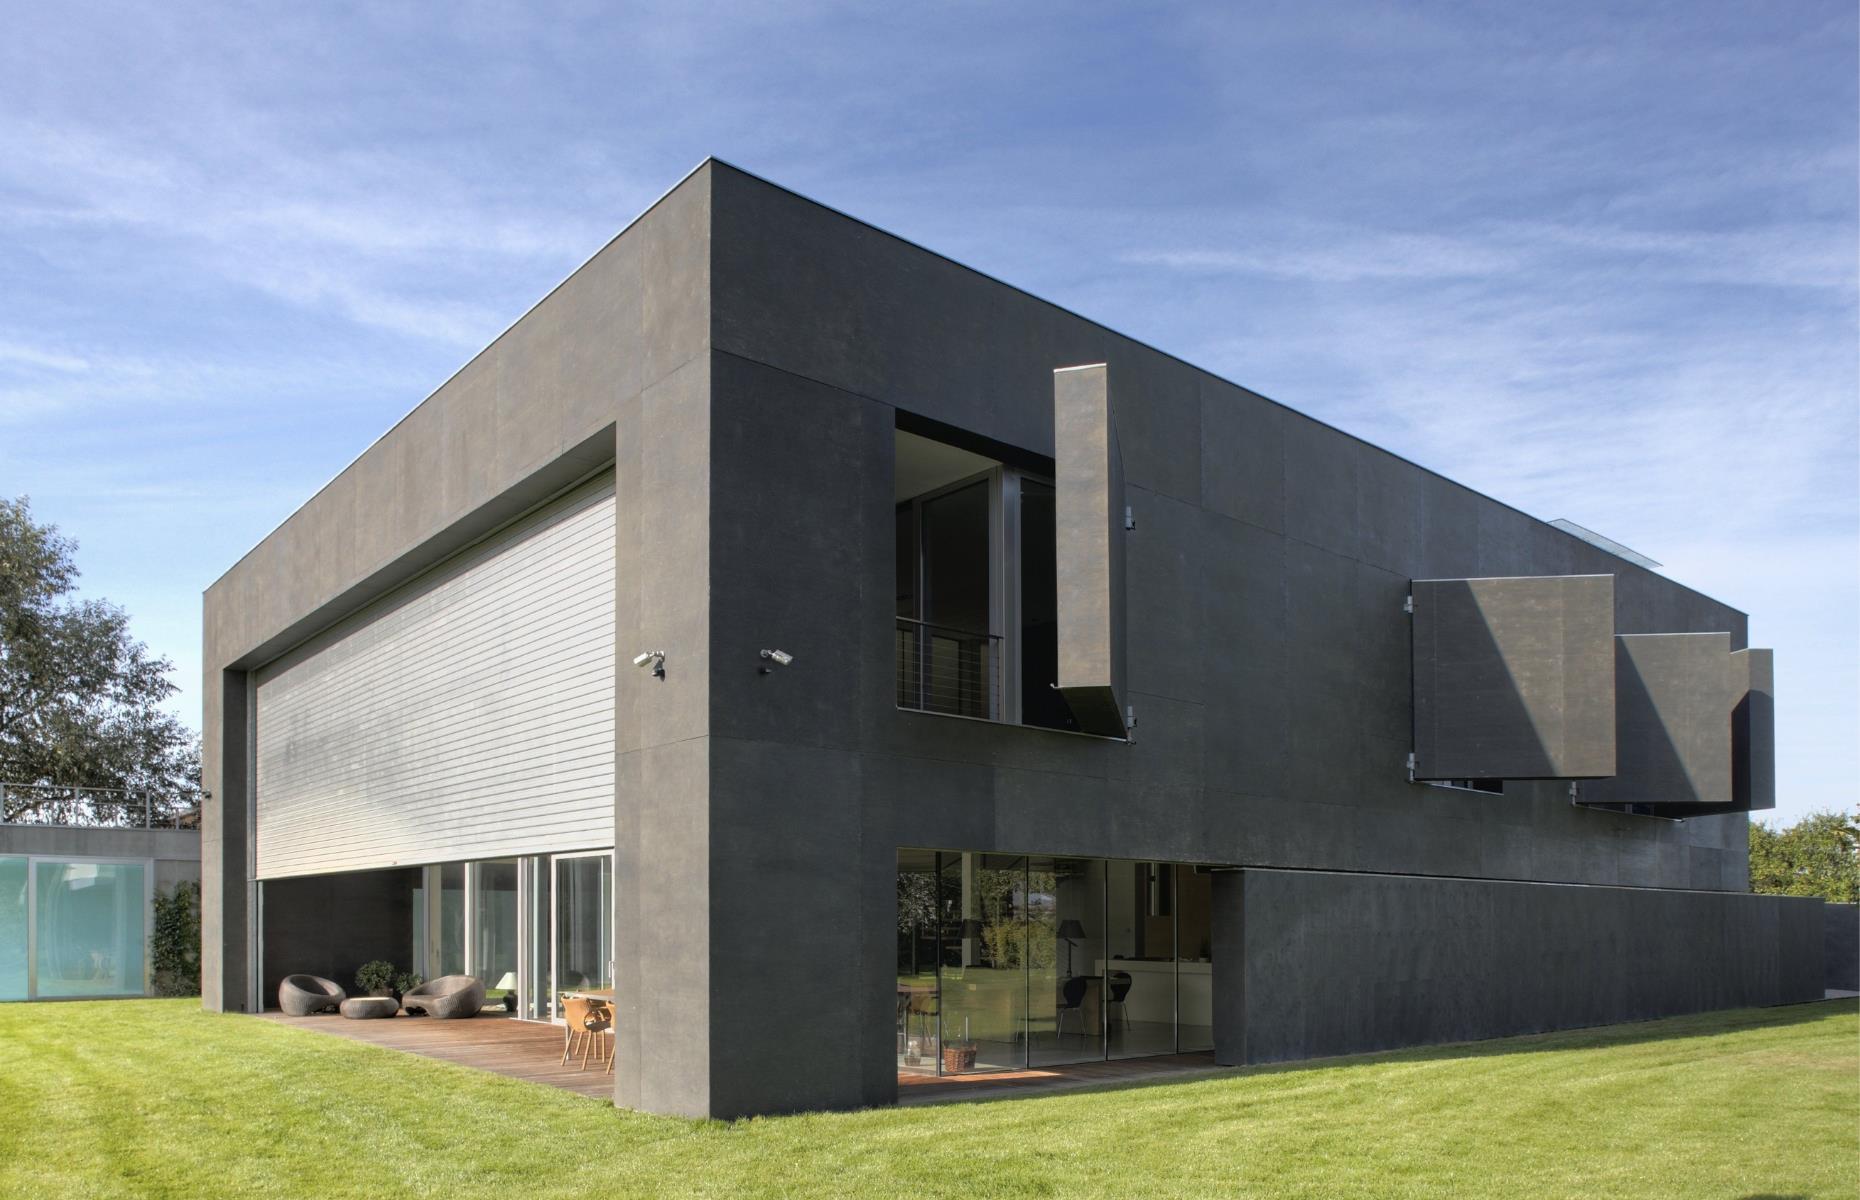 <p>Designed by <a href="https://www.kwkpromes.pl/en/">KWK Promes</a>, the exterior walls of the Safe House can cover every aperture to create a seamless box, closing the entire property off from the outside world should the need arise. Concrete doors sit on hinges and can be opened to let the daylight in when the coast is clear. Surrounded by impenetrable concrete walls and a gate, any intruders that manage to get into the grounds will enter a restricted safety zone – the perfect spot to unleash a surprise attack.</p>